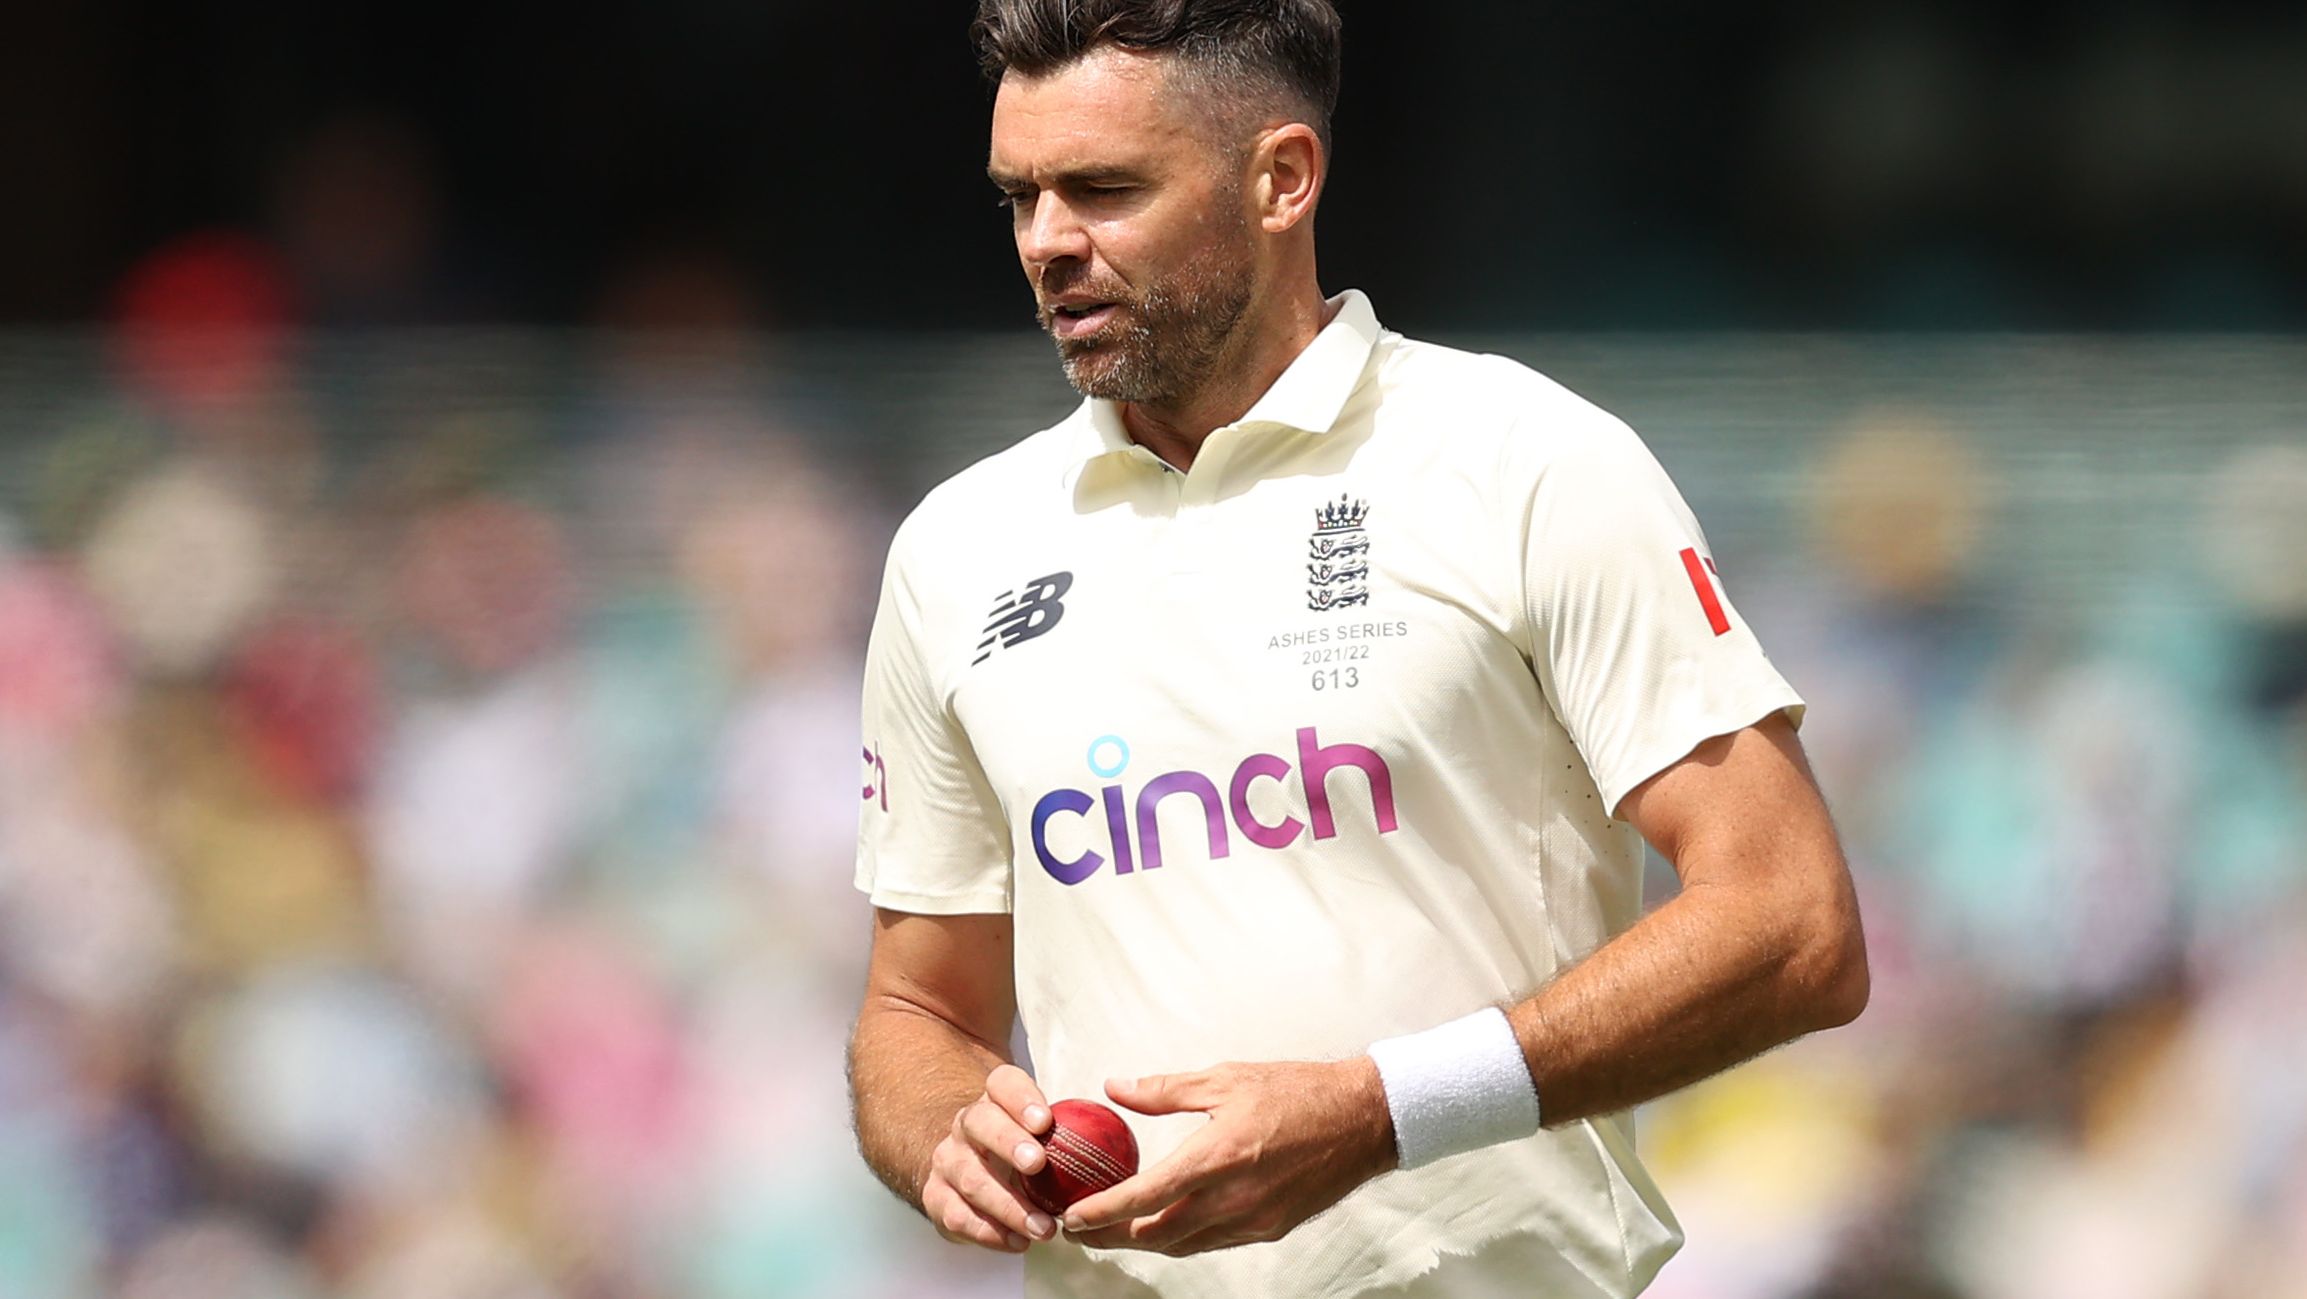 James Anderson of England bowls during day two of the Fourth Test Match in the Ashes series.